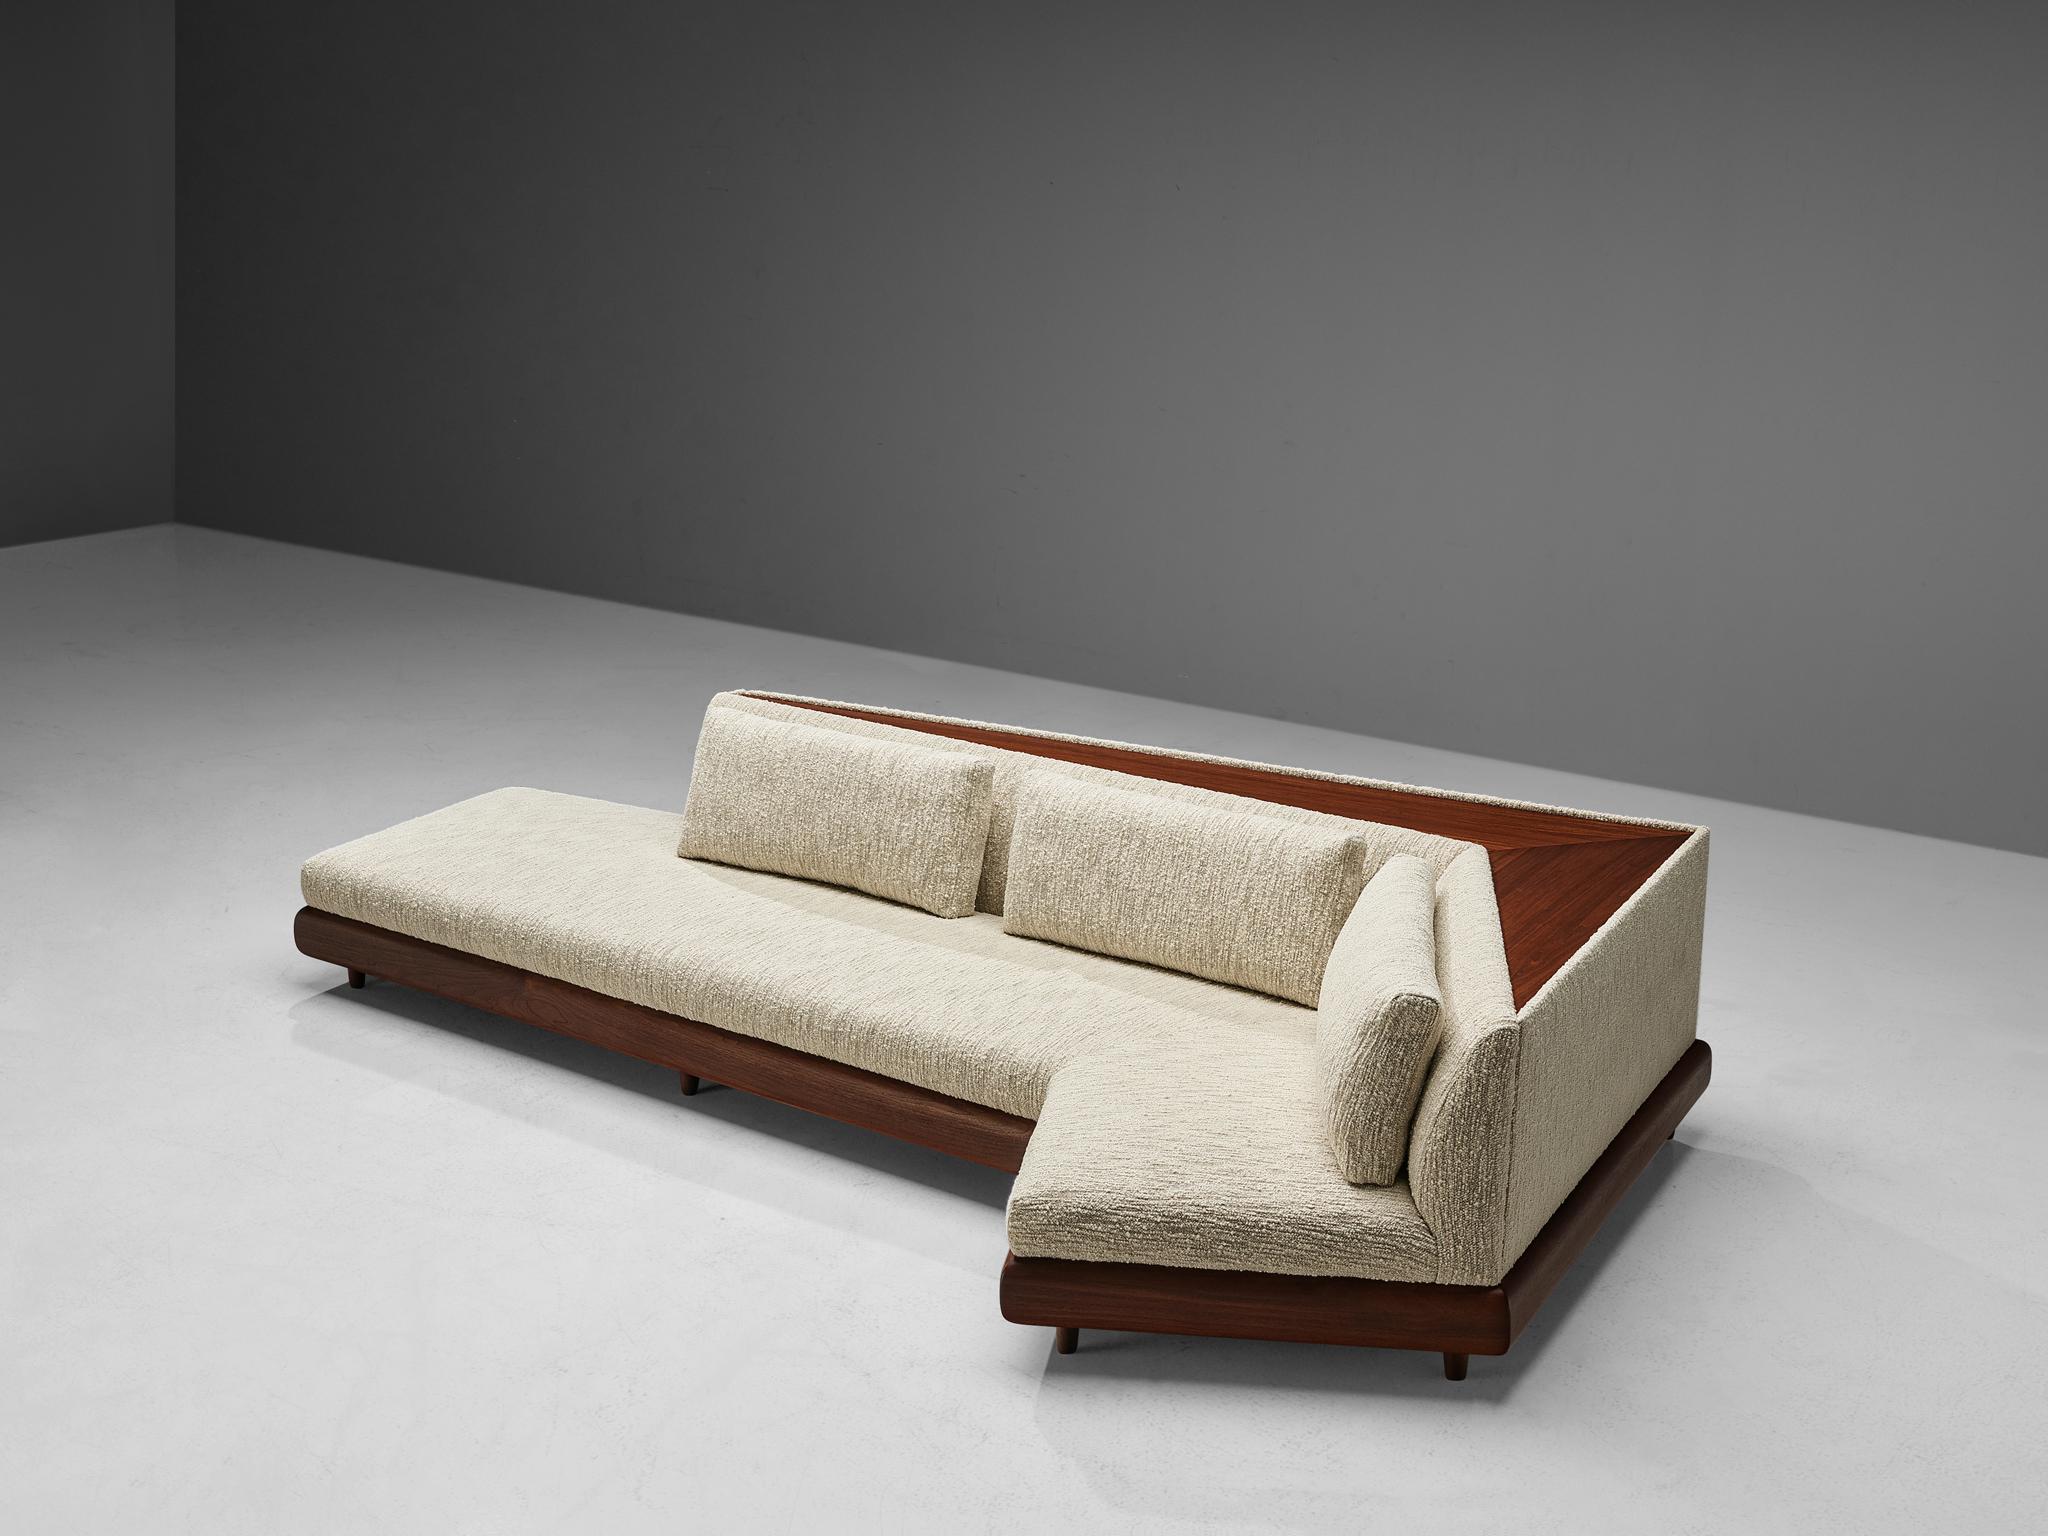 Adrian Pearsall, 'Boomerang' sofa, in cream white textured upholstery and walnut, United States, 1960s

This boomerang sofa has a unique shape with sharp and geometric lines which create a monumental look. The contrasting soft tones of the cream